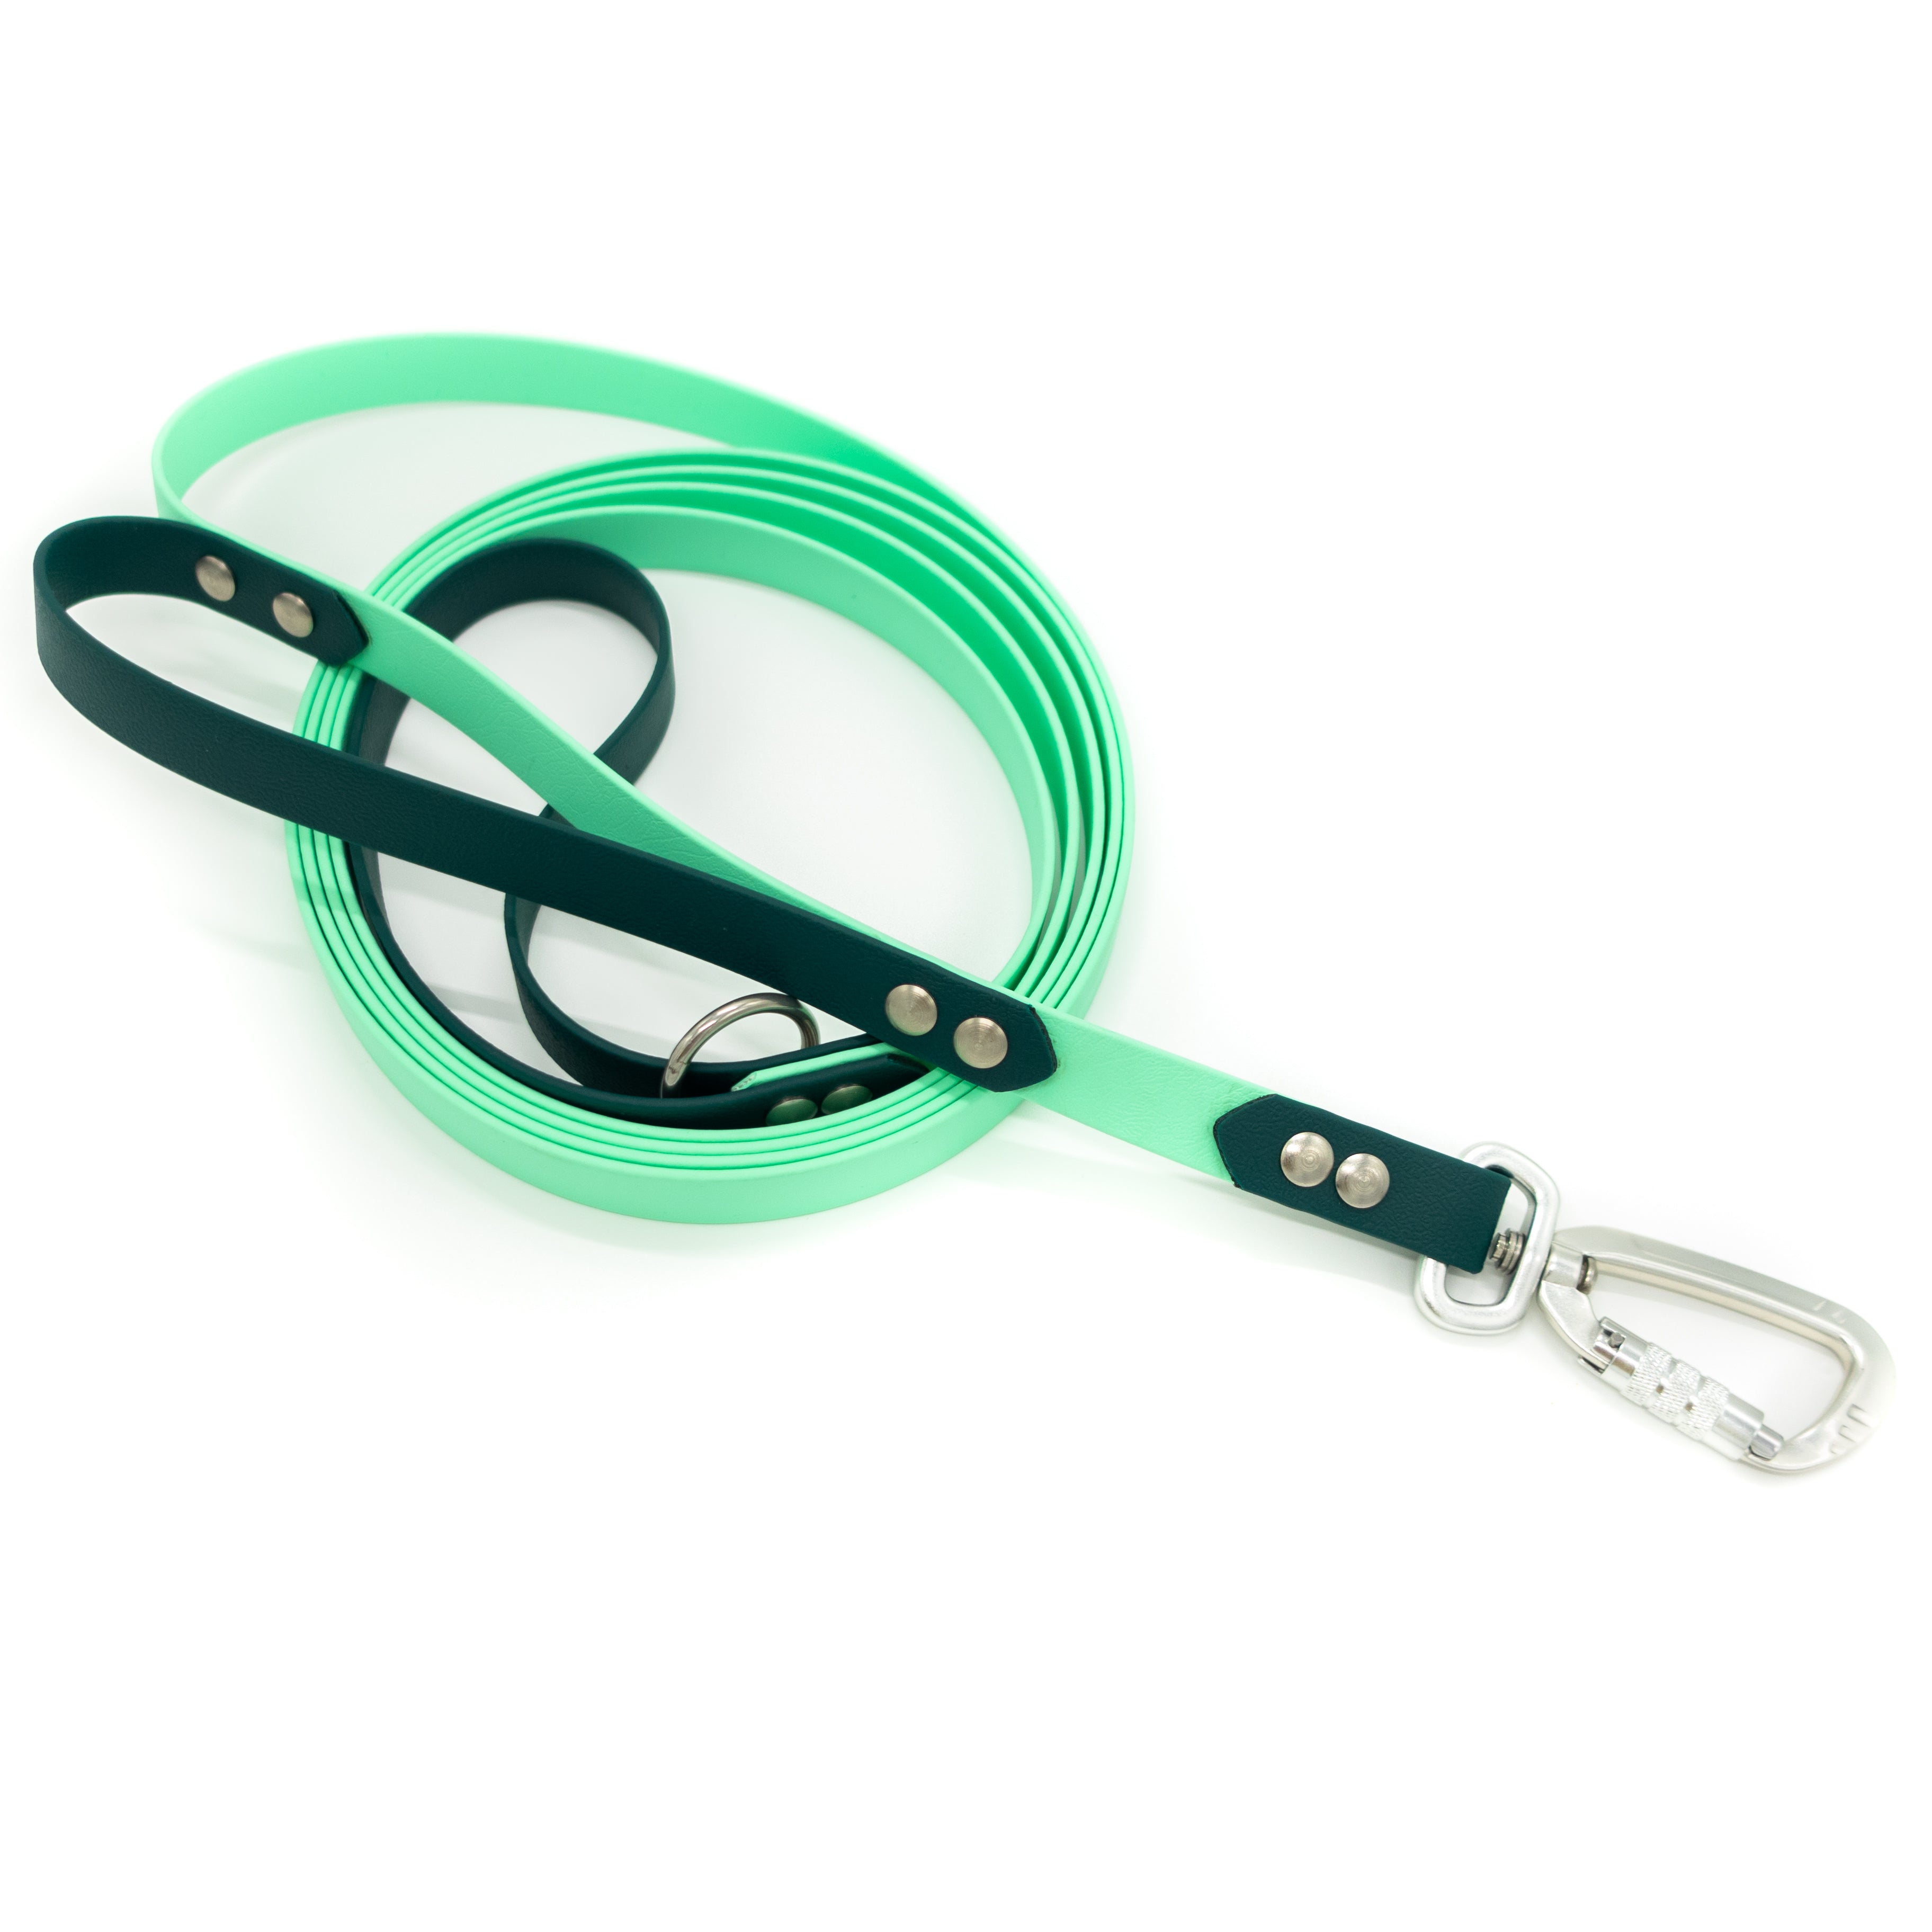 Two tone BioThane lead with swivel carabiner